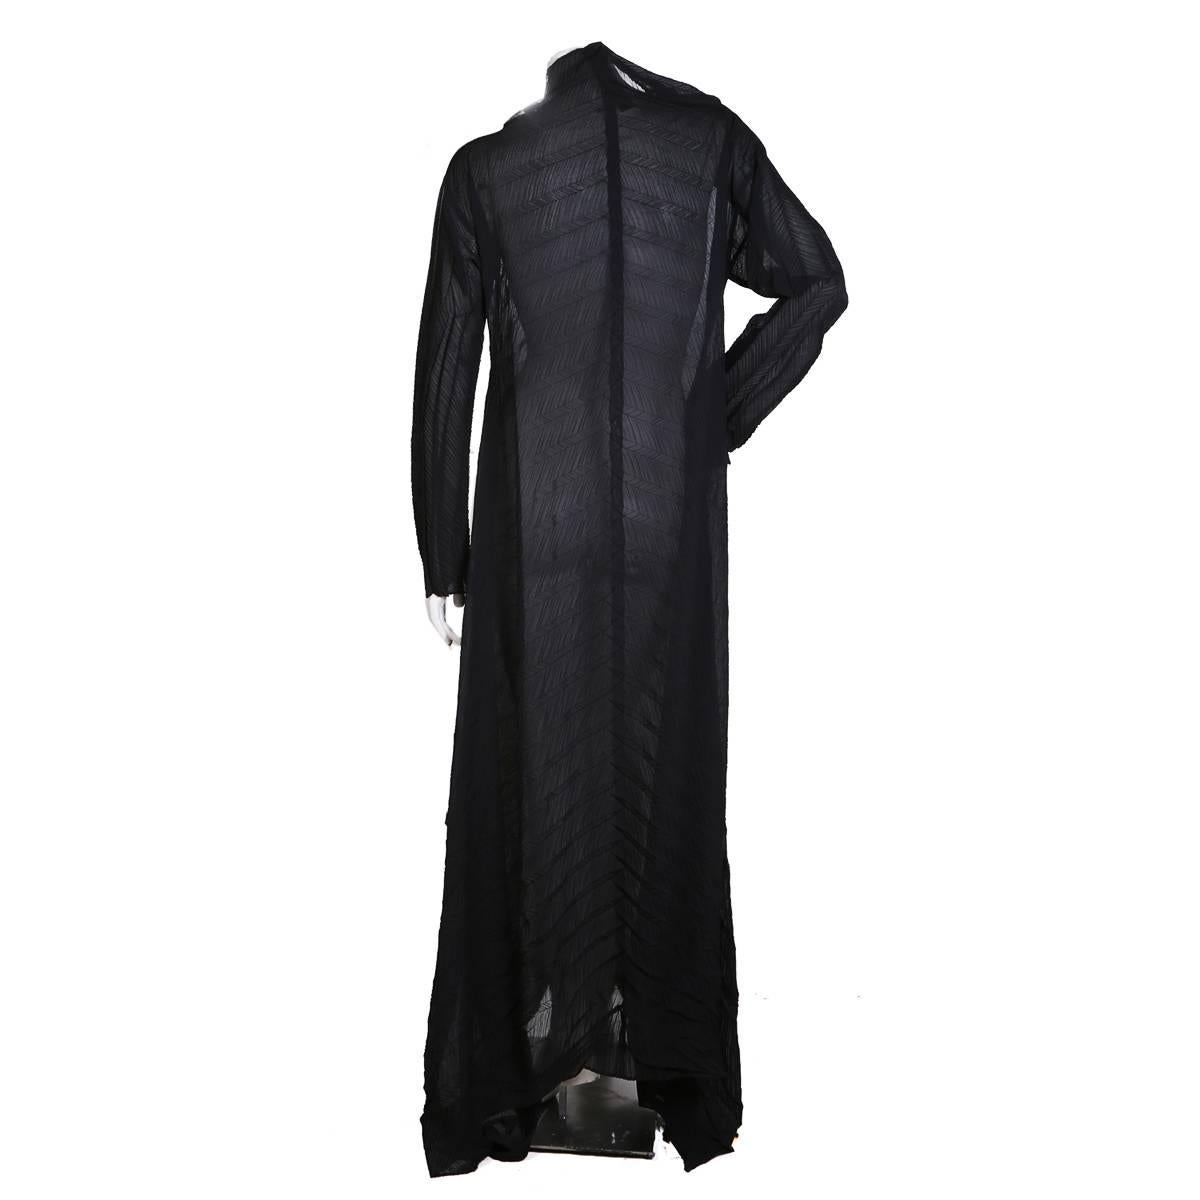 Product Details:
Vintage dress from Issey Miyake
Long sleeves, maxi length
Pleated thin polyester fabric
Condition: Great, missing tag

Size/Measurements:
42